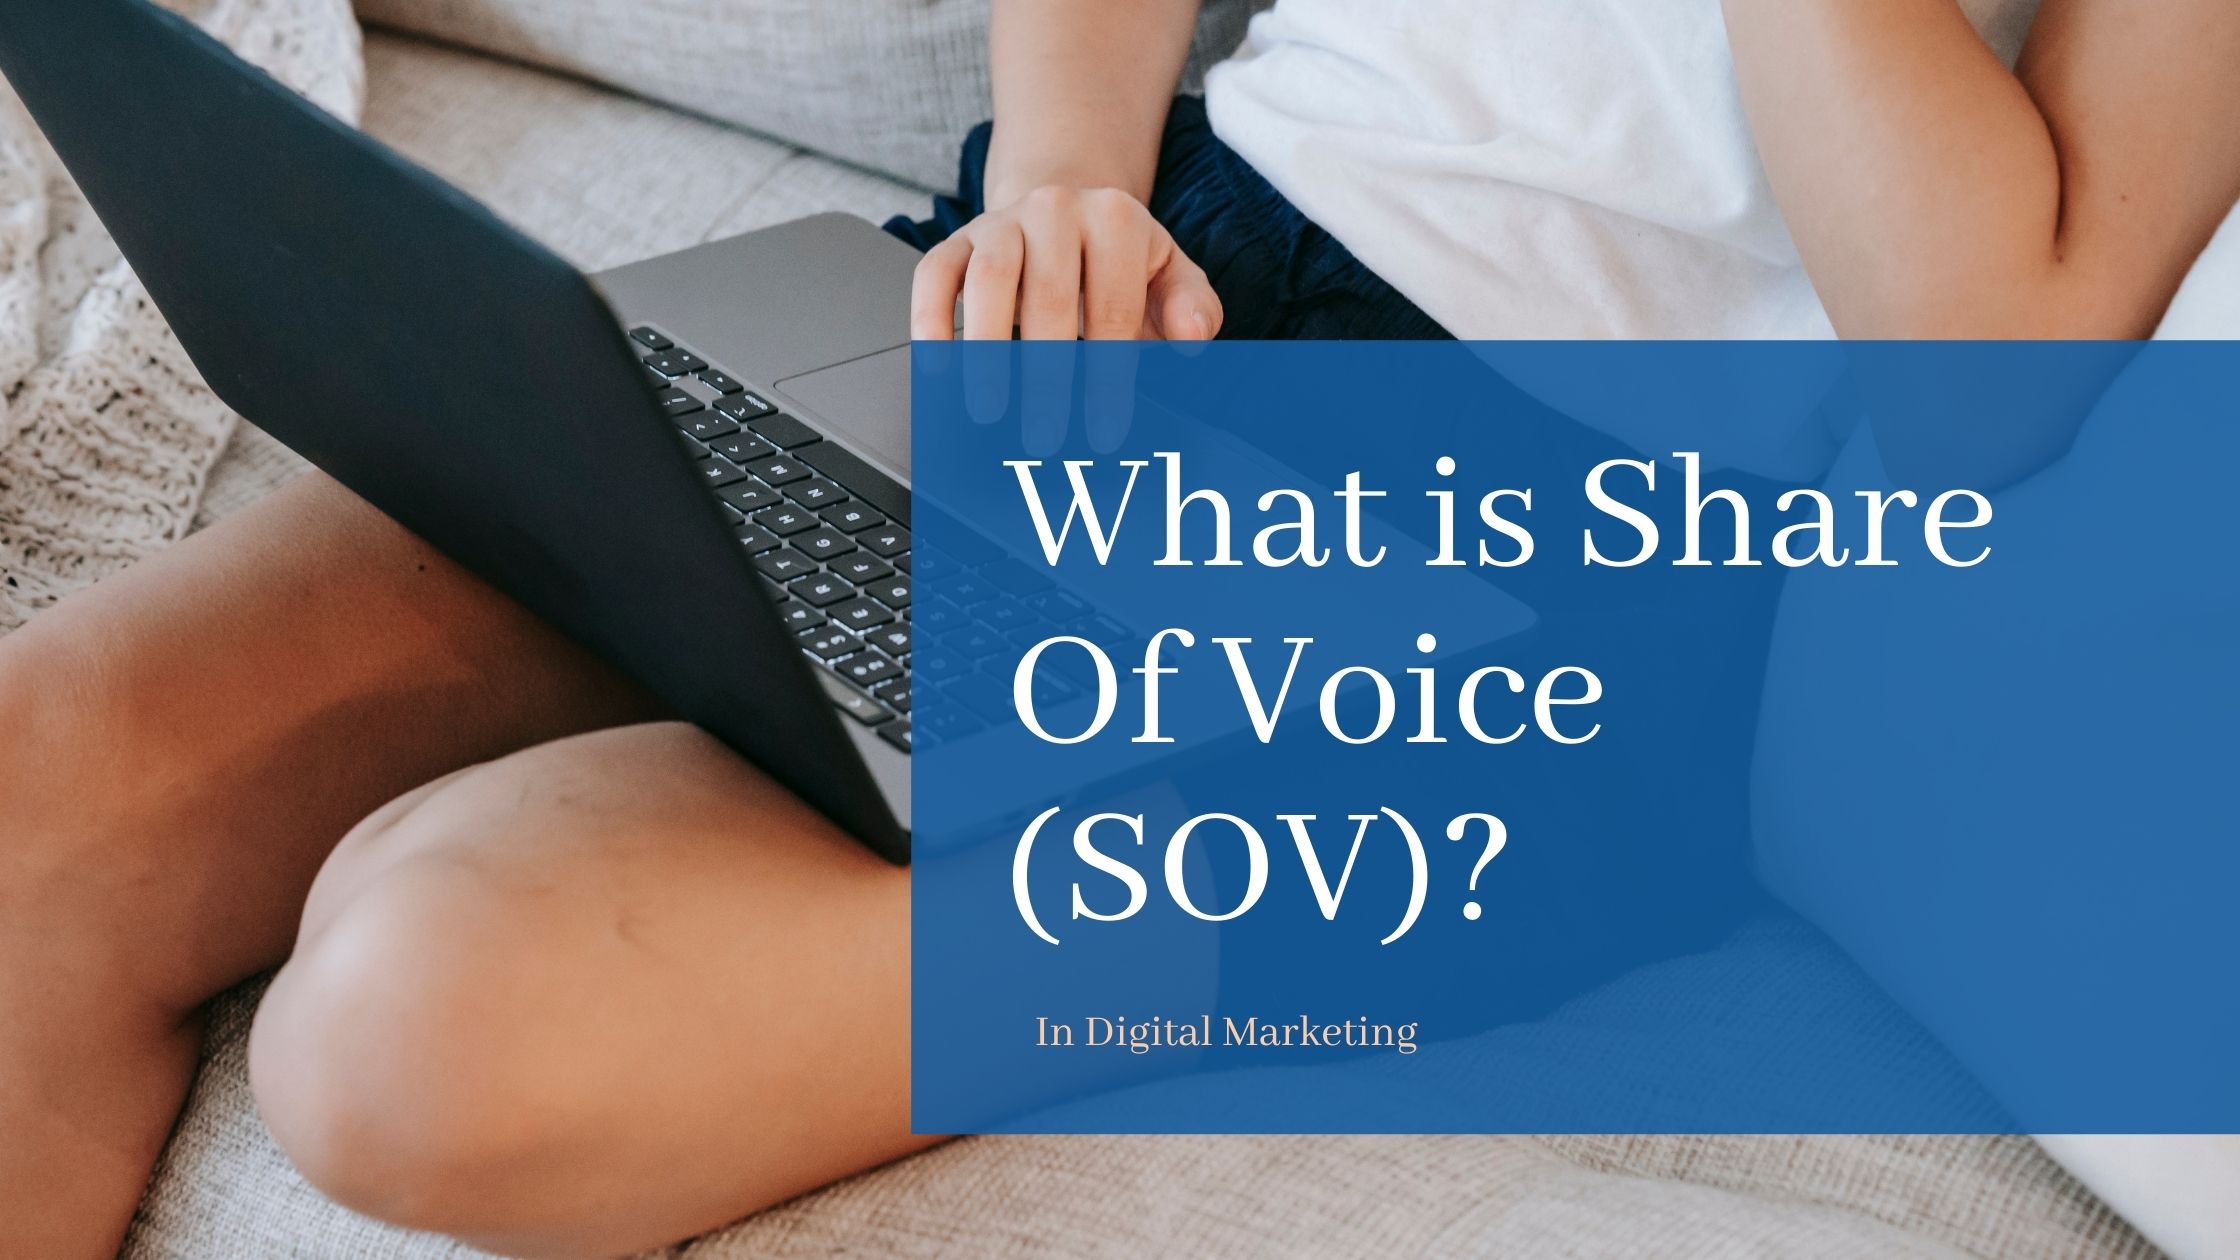 In this blog post, we'll break everything down so you can understand what SOV is, how to measure it, and why it's important for your business.